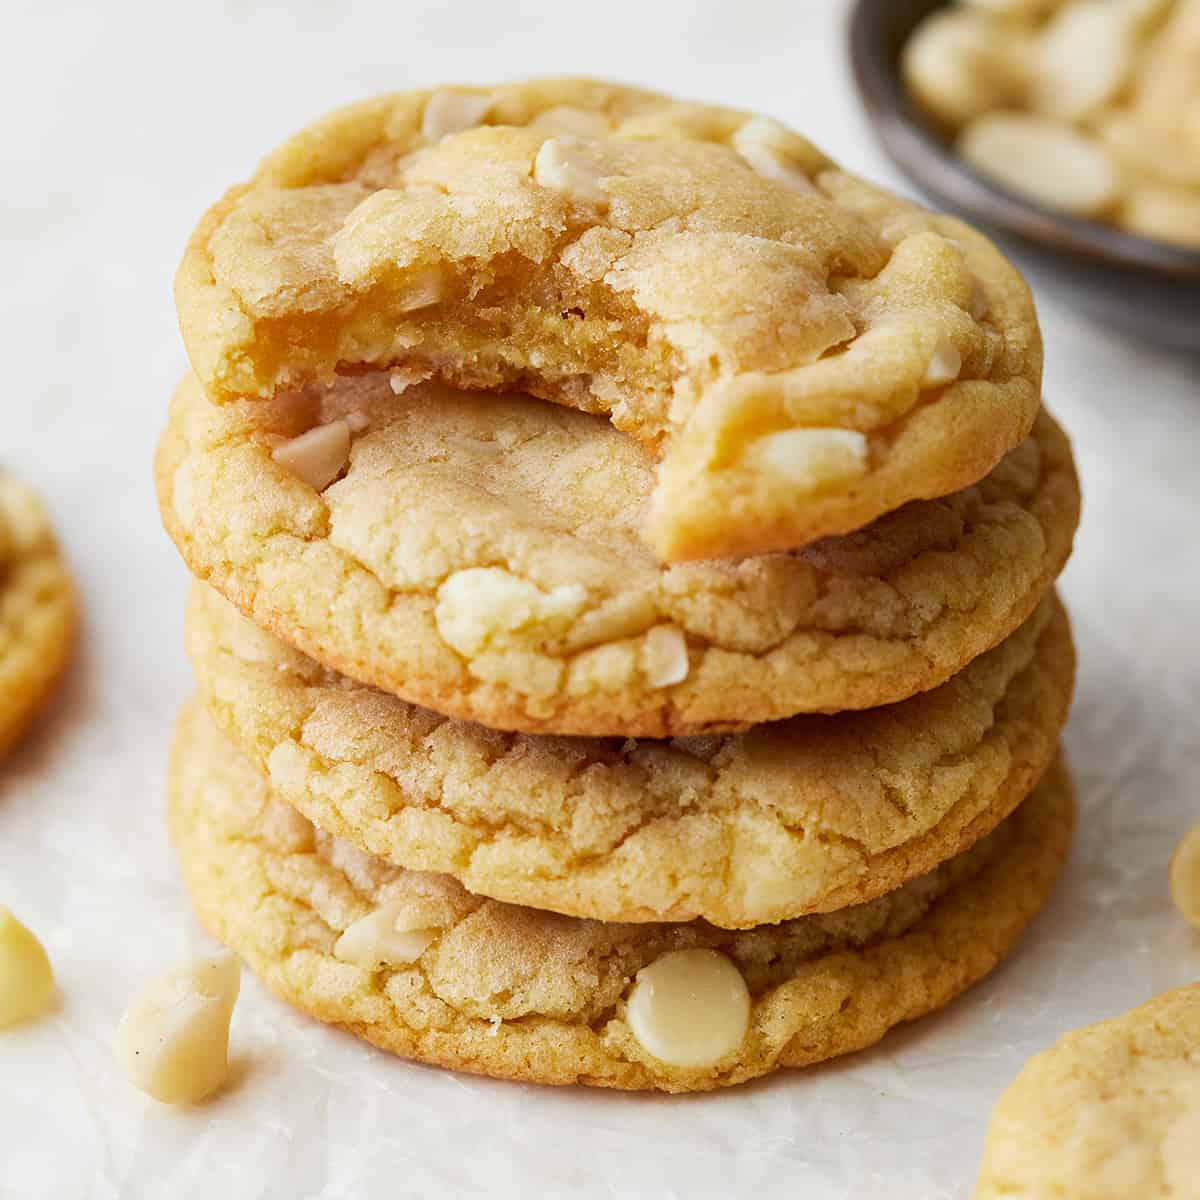 a stack of 4 White Chocolate Macadamia Nut Cookies, the top one has a bite taken out of it